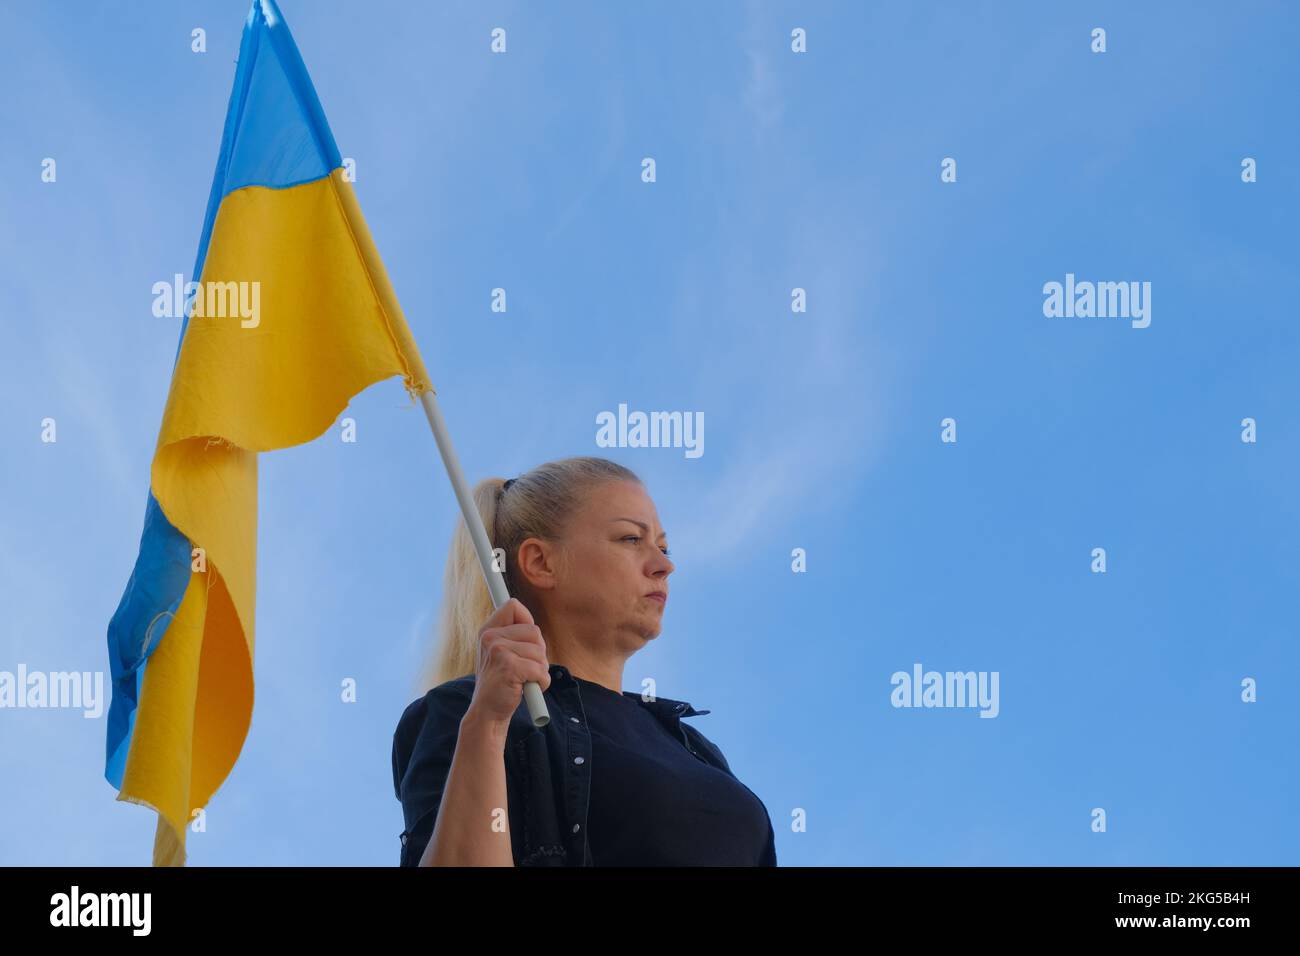 The Ukraine-Russia war was protested in Turkey. Woman holding the flag of Ukraine. Stock Photo